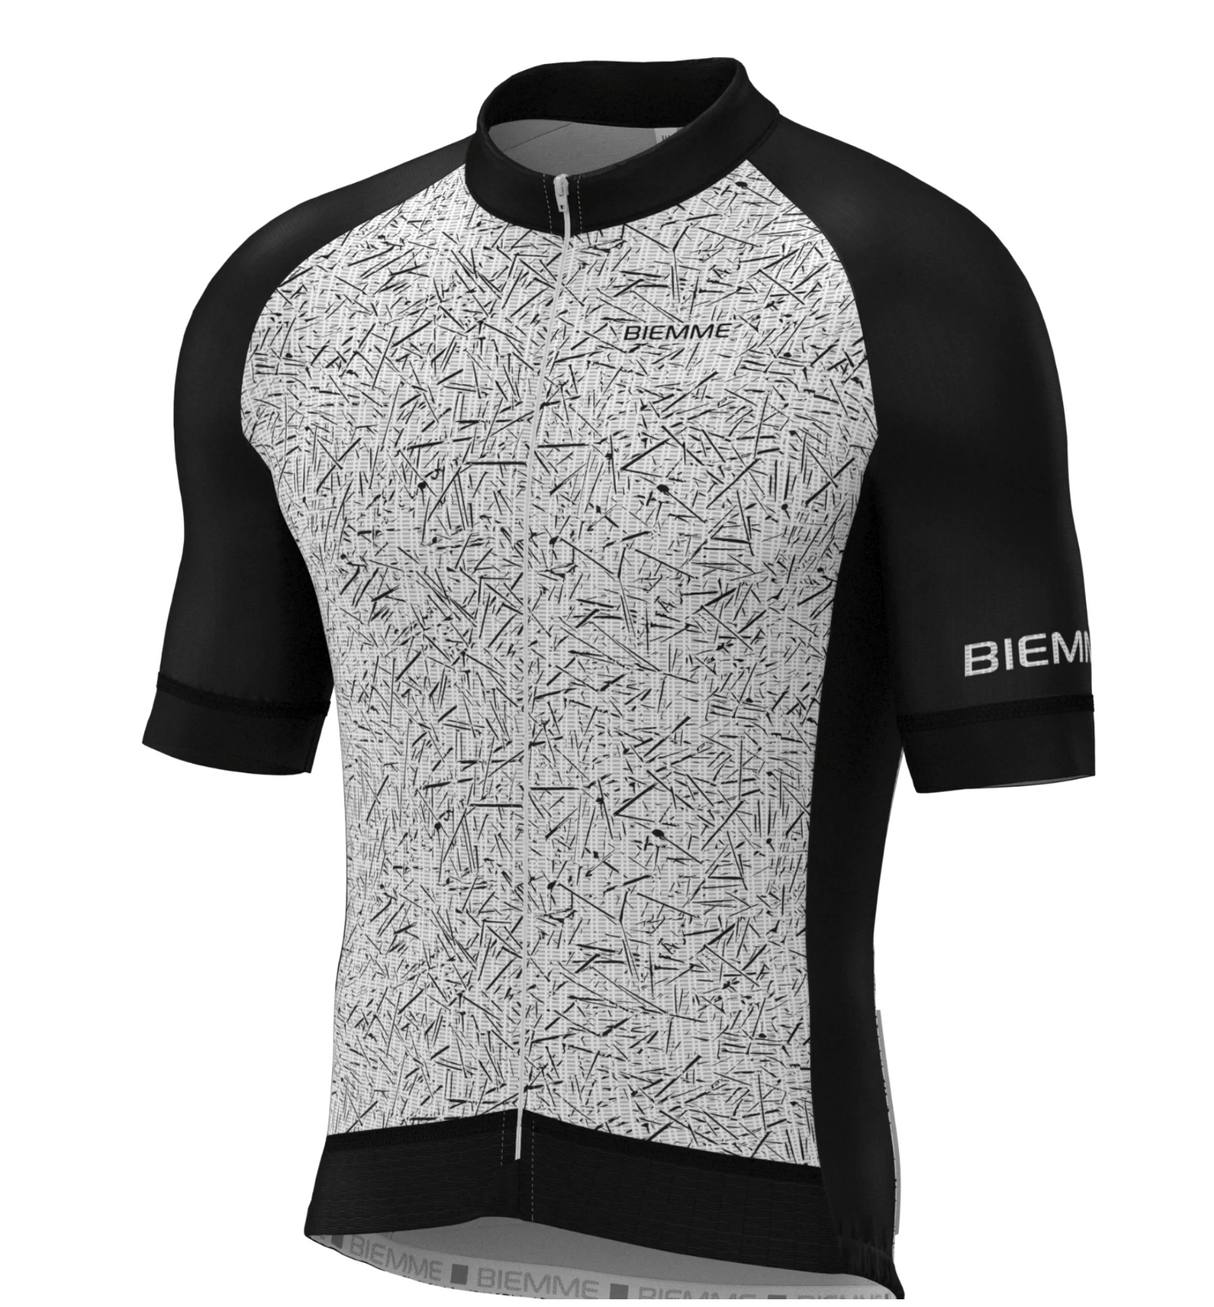 Biemme Sirio SS Cycling Jersey - Mens- Black/White - Size Large - Made in Italy